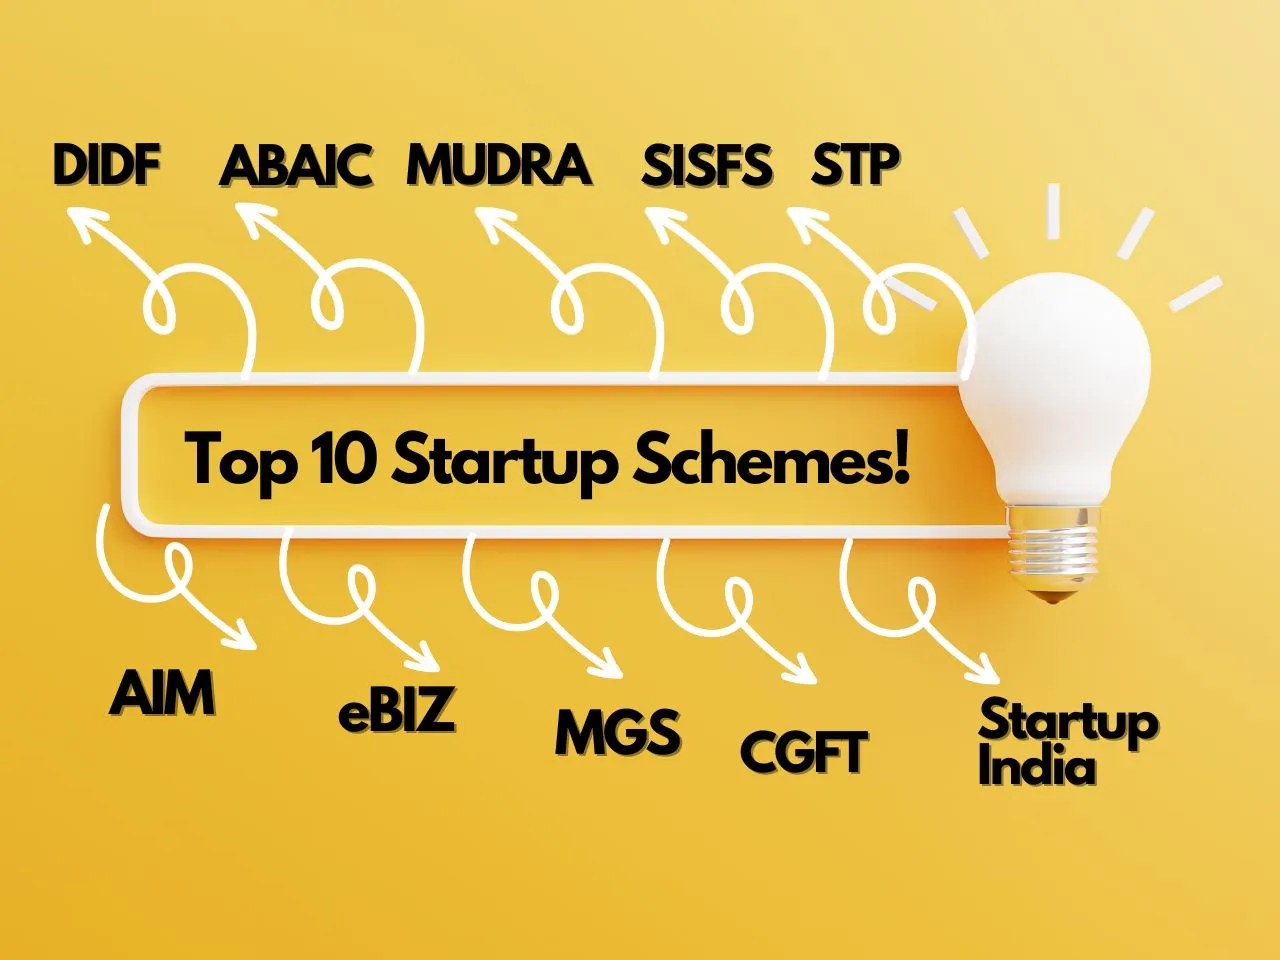 What are the Top 10 Startup India Schemes?